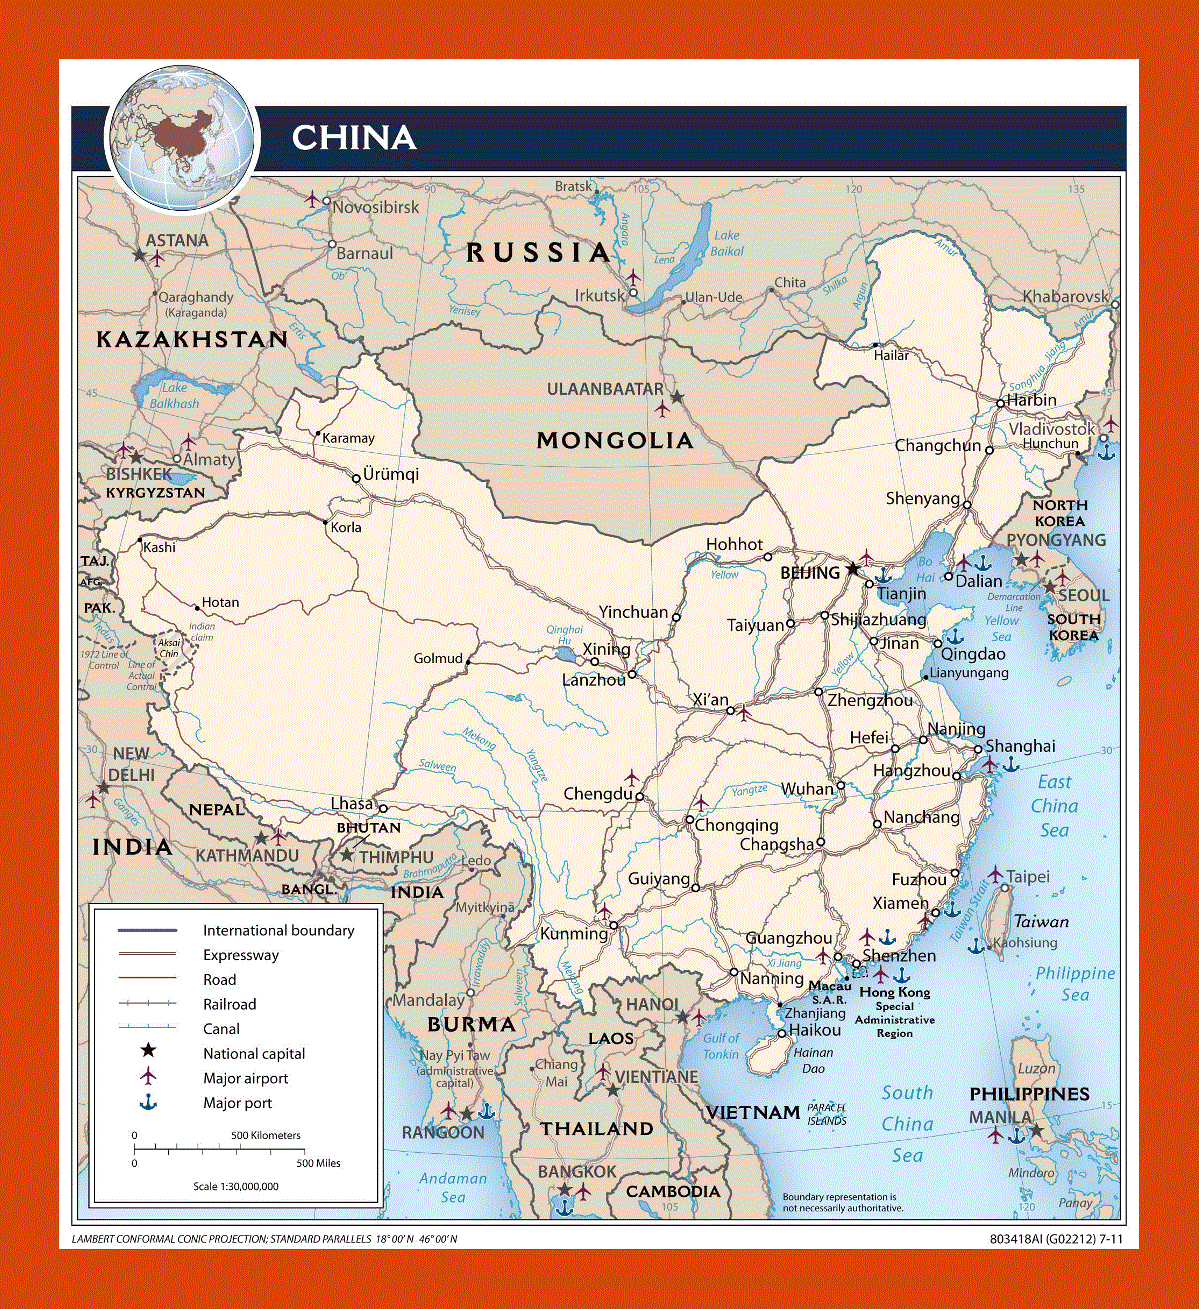 Political map of China - 2011